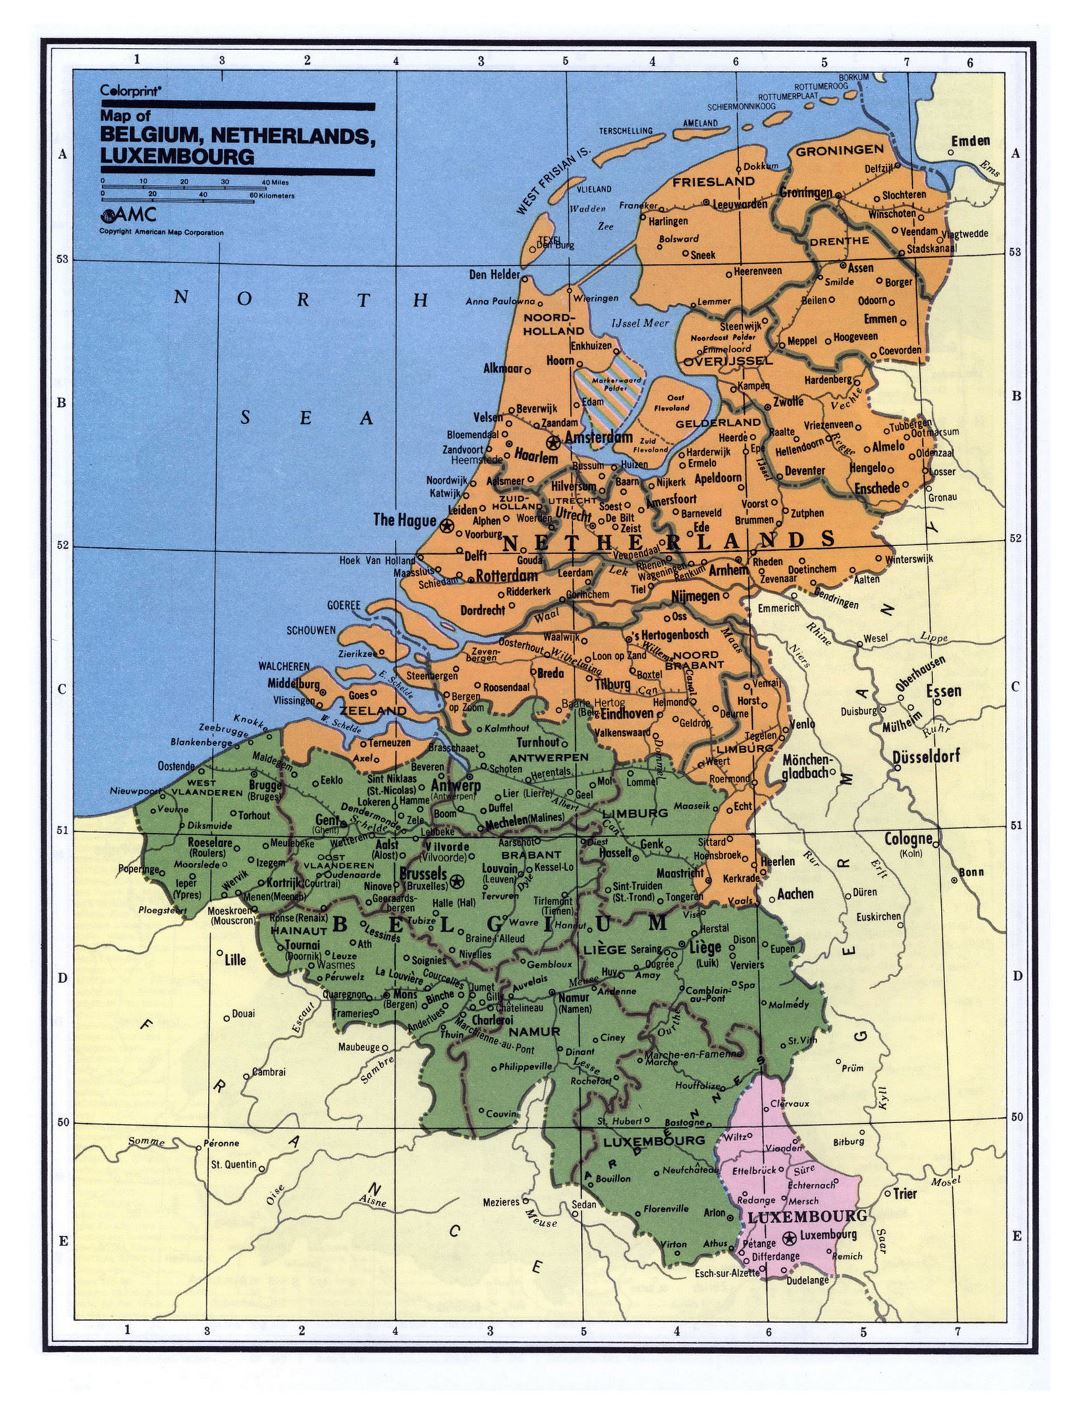 Detailed political and administrative map of Belgium, Netherlands and Luxembourg